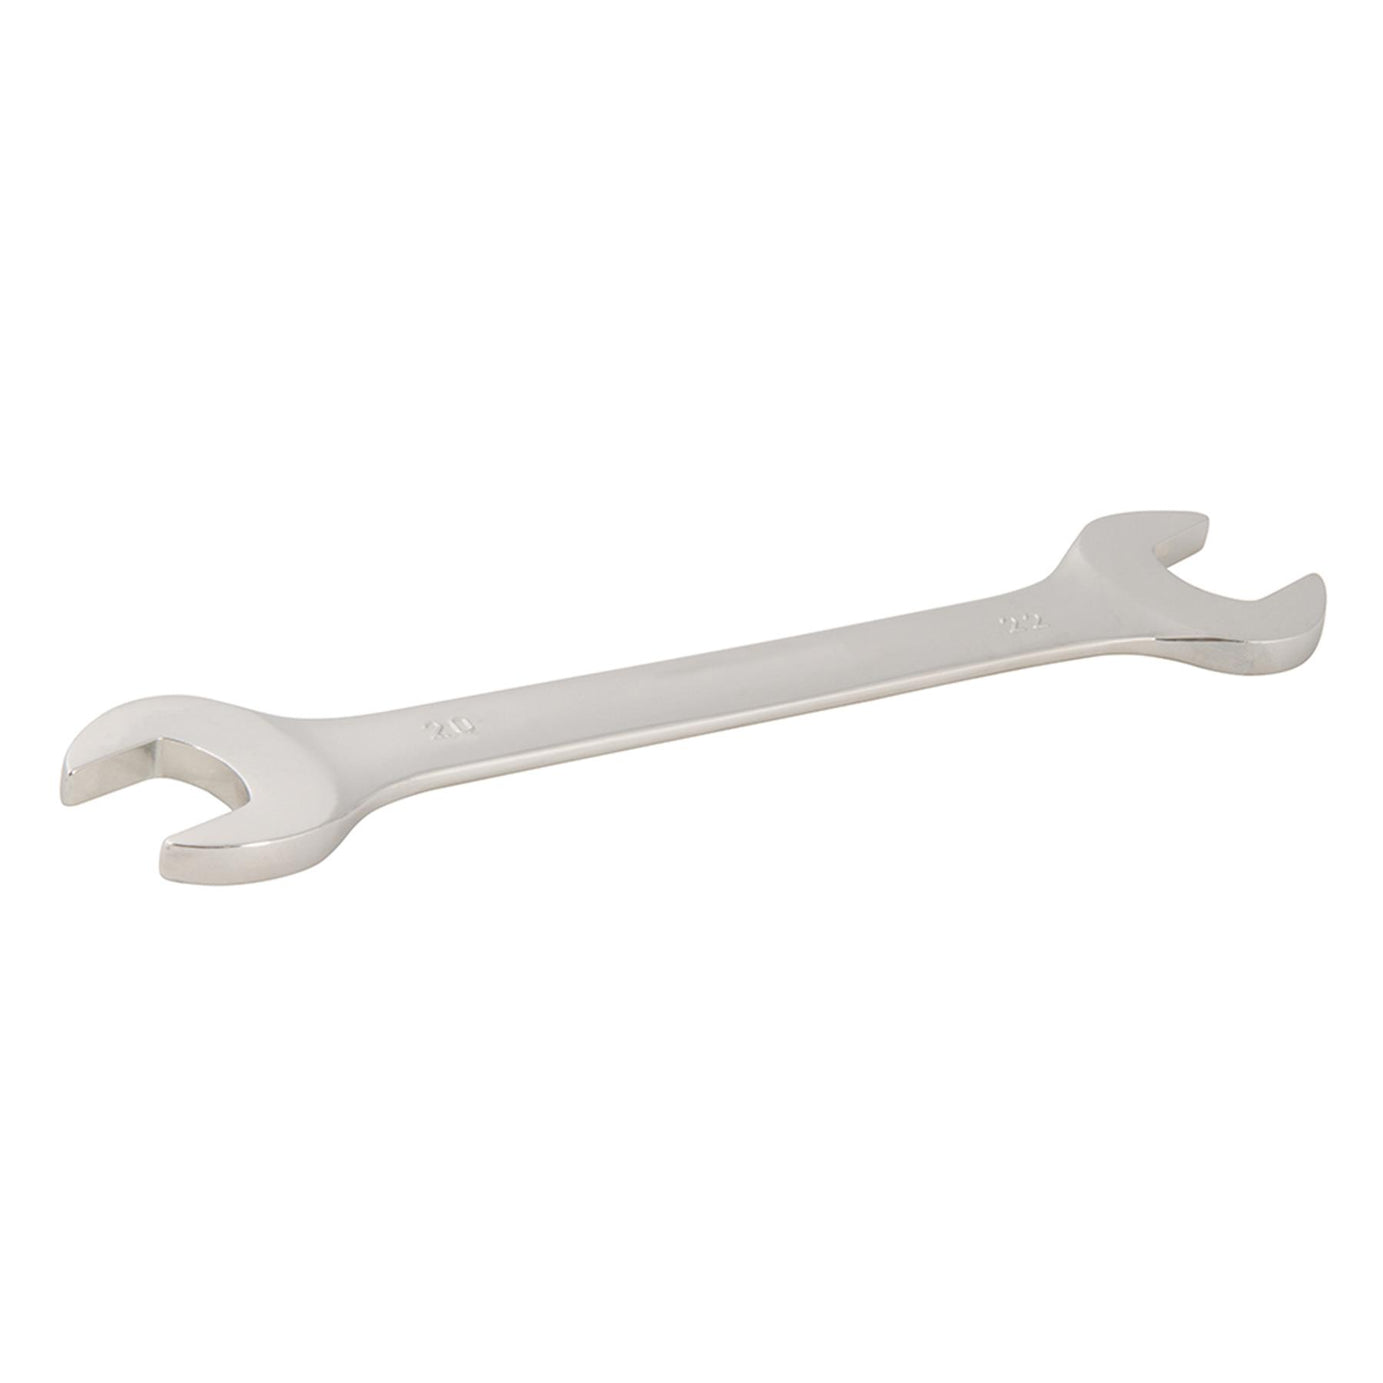 Metric Open-Ended Spanner Wrench